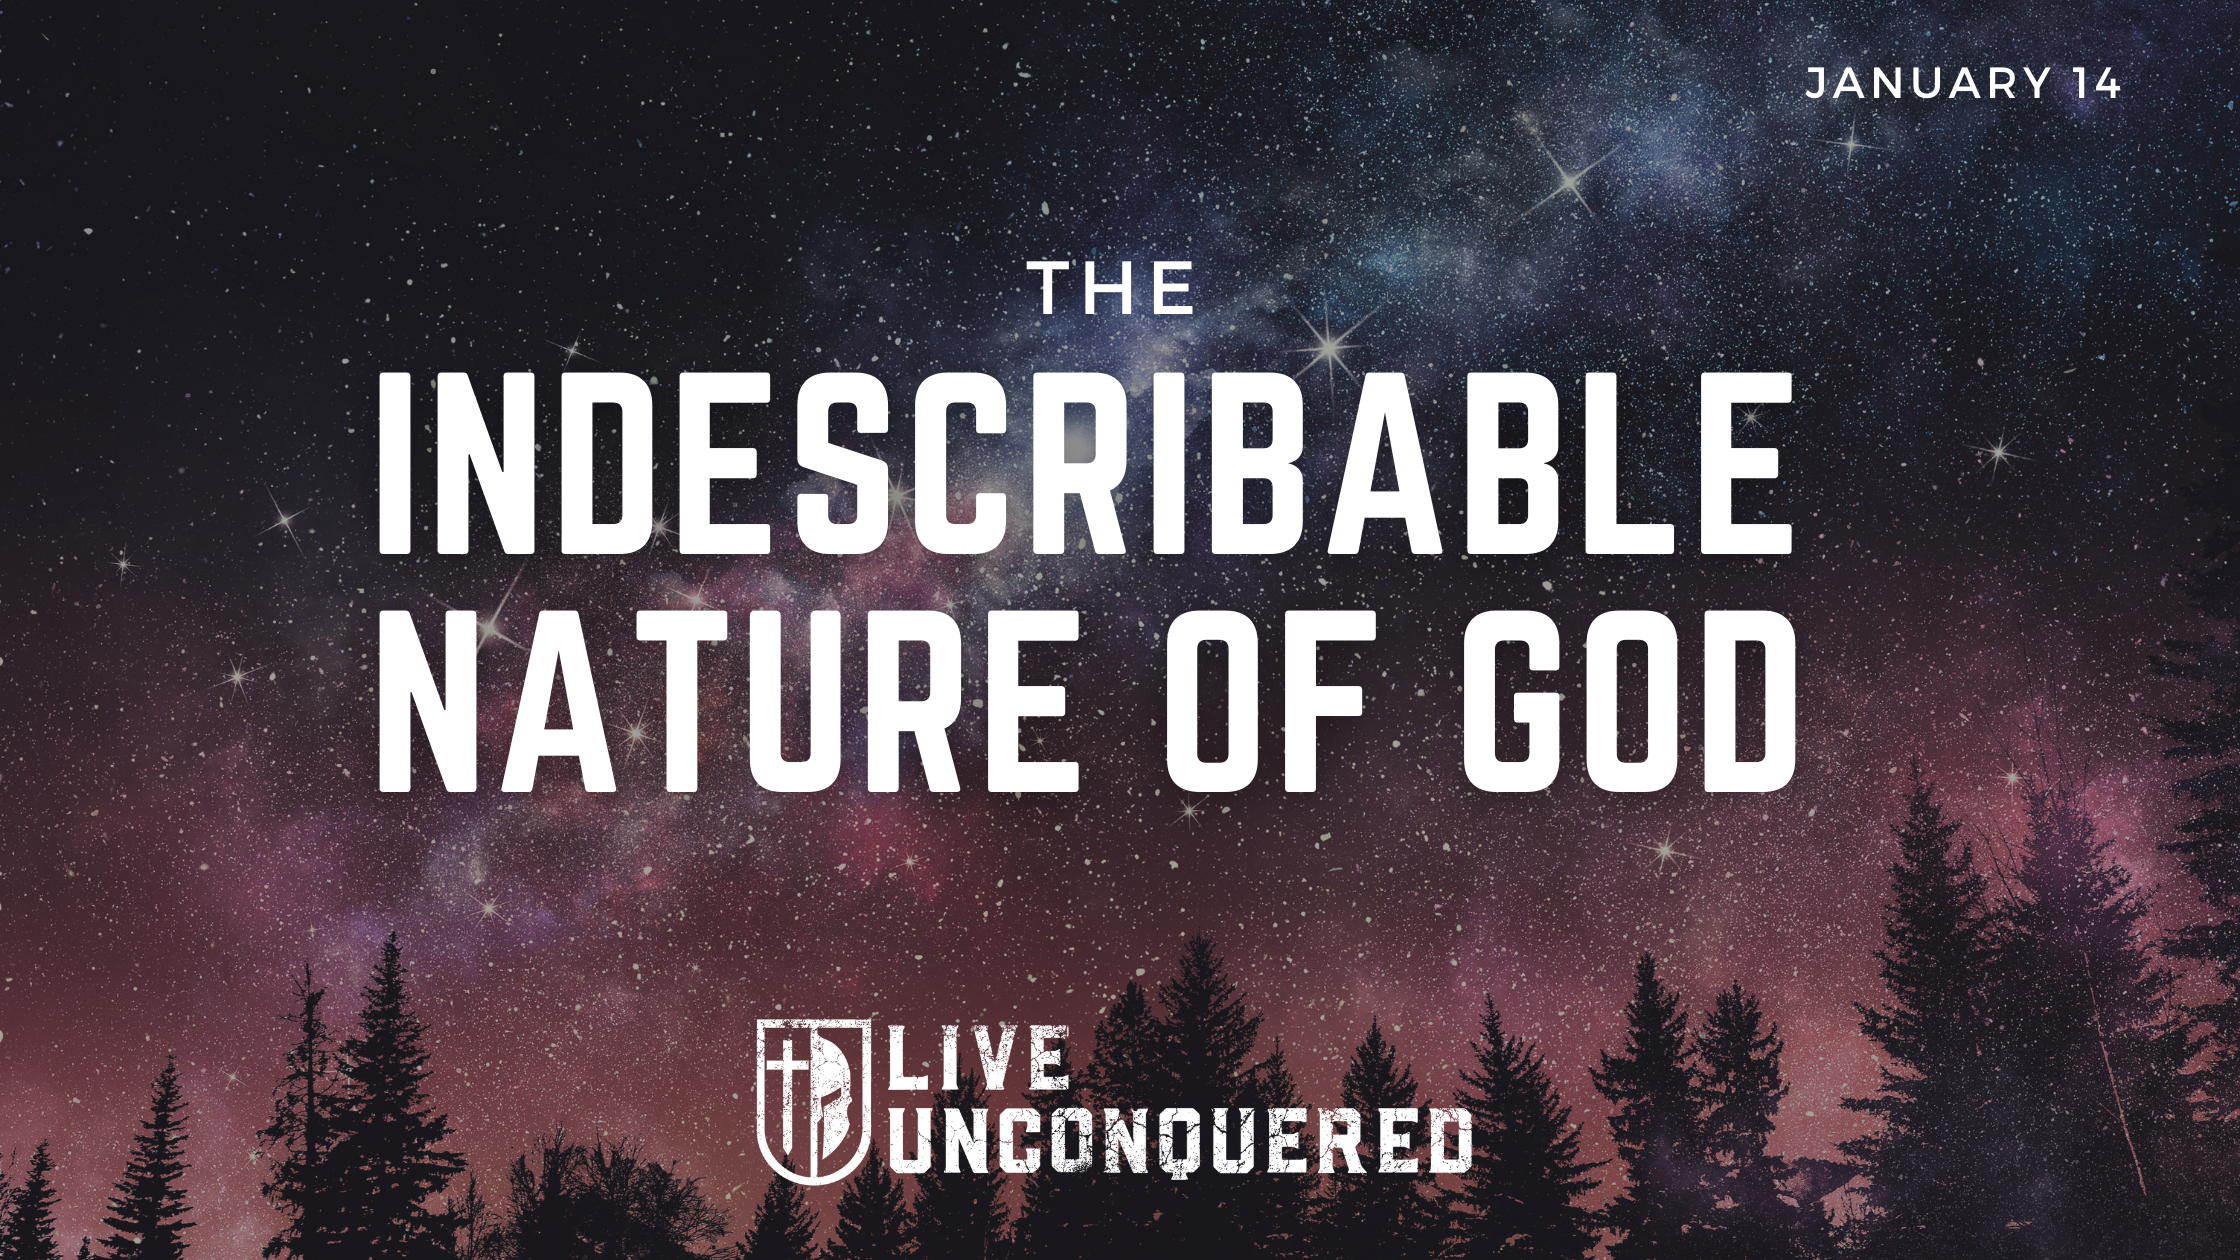 The Indescribable Nature of God